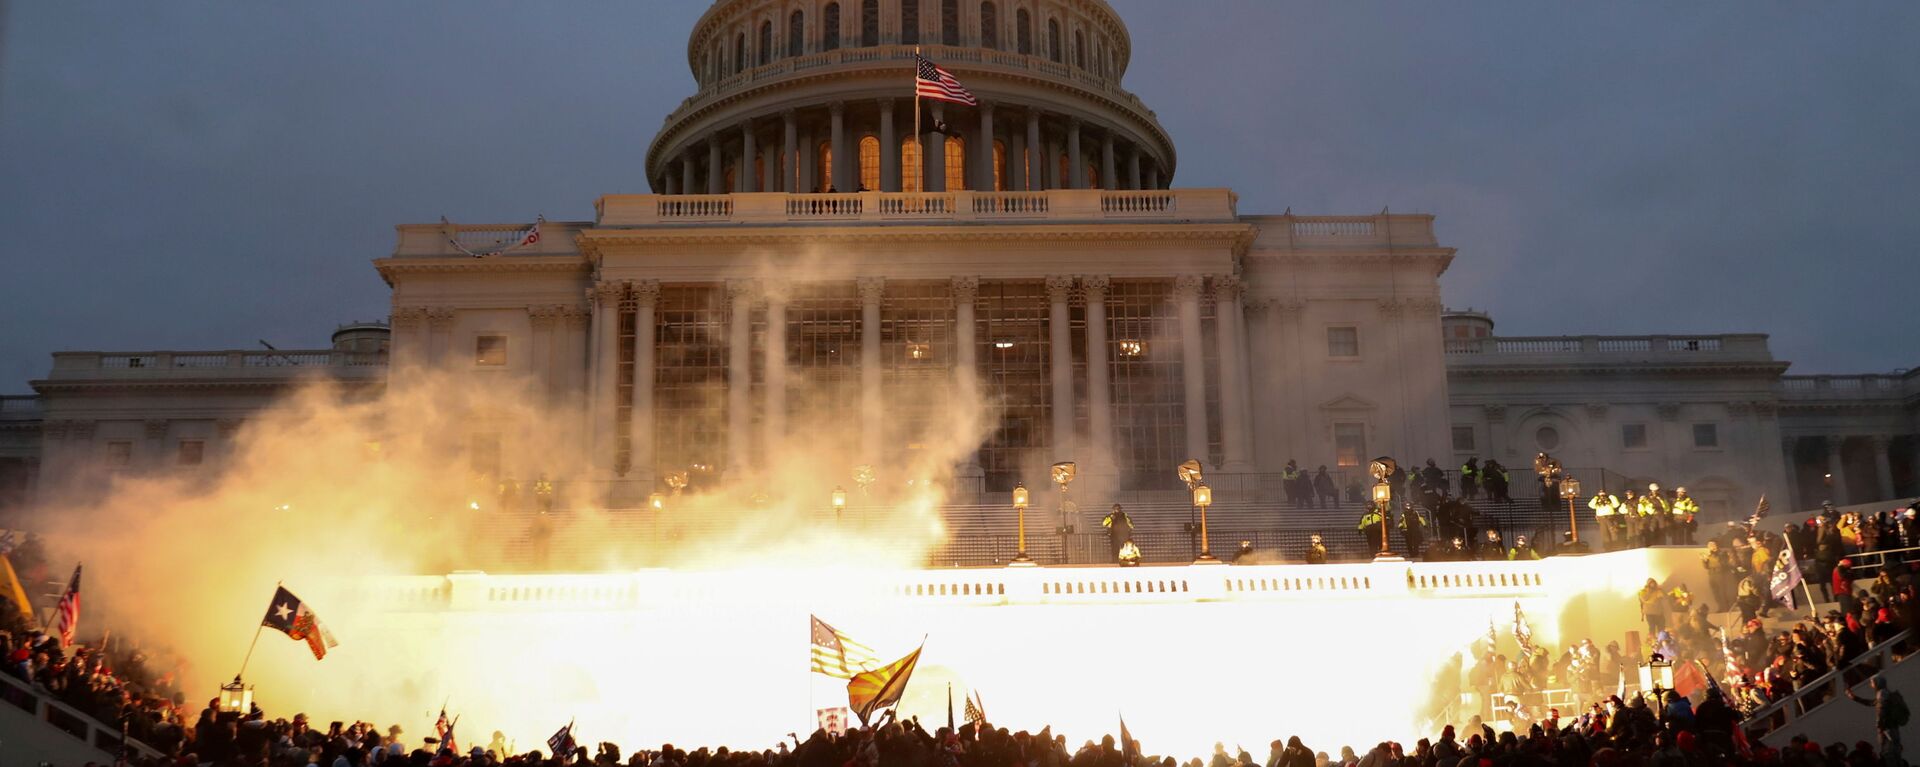 An explosion caused by a police munition is seen while supporters of U.S. President Donald Trump gather in front of the U.S. Capitol Building in Washington, U.S., January 6, 2021. - Sputnik International, 1920, 25.06.2021